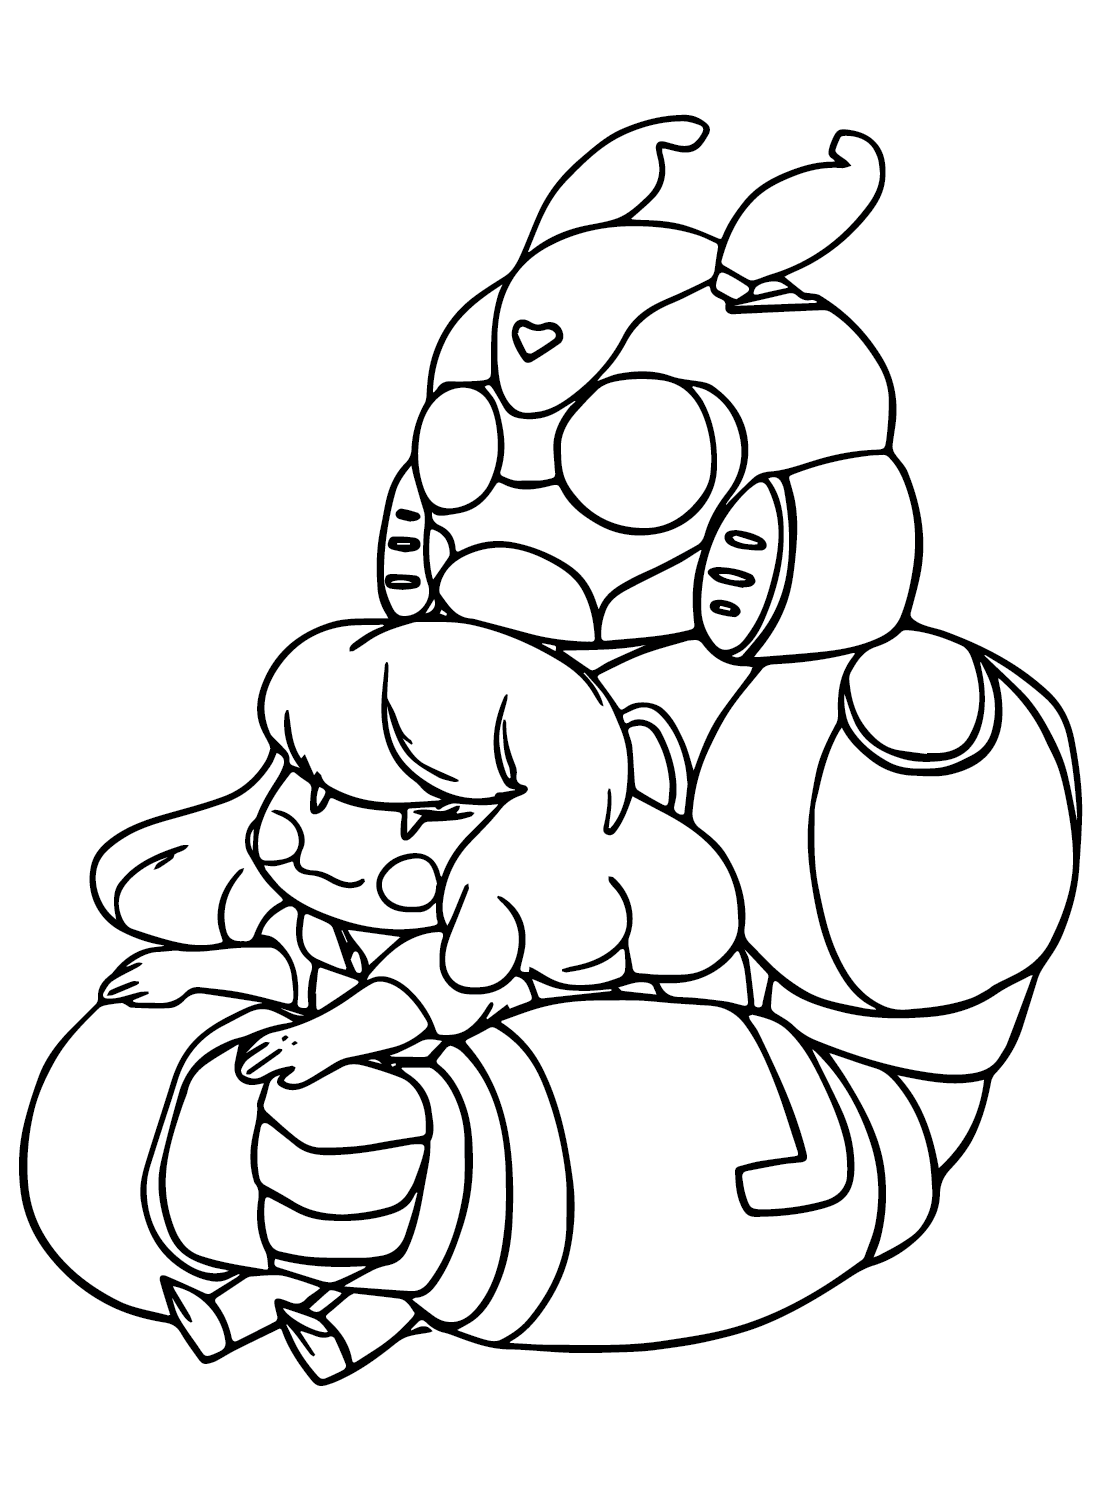 Coloring Page Bumblebee with Charlie